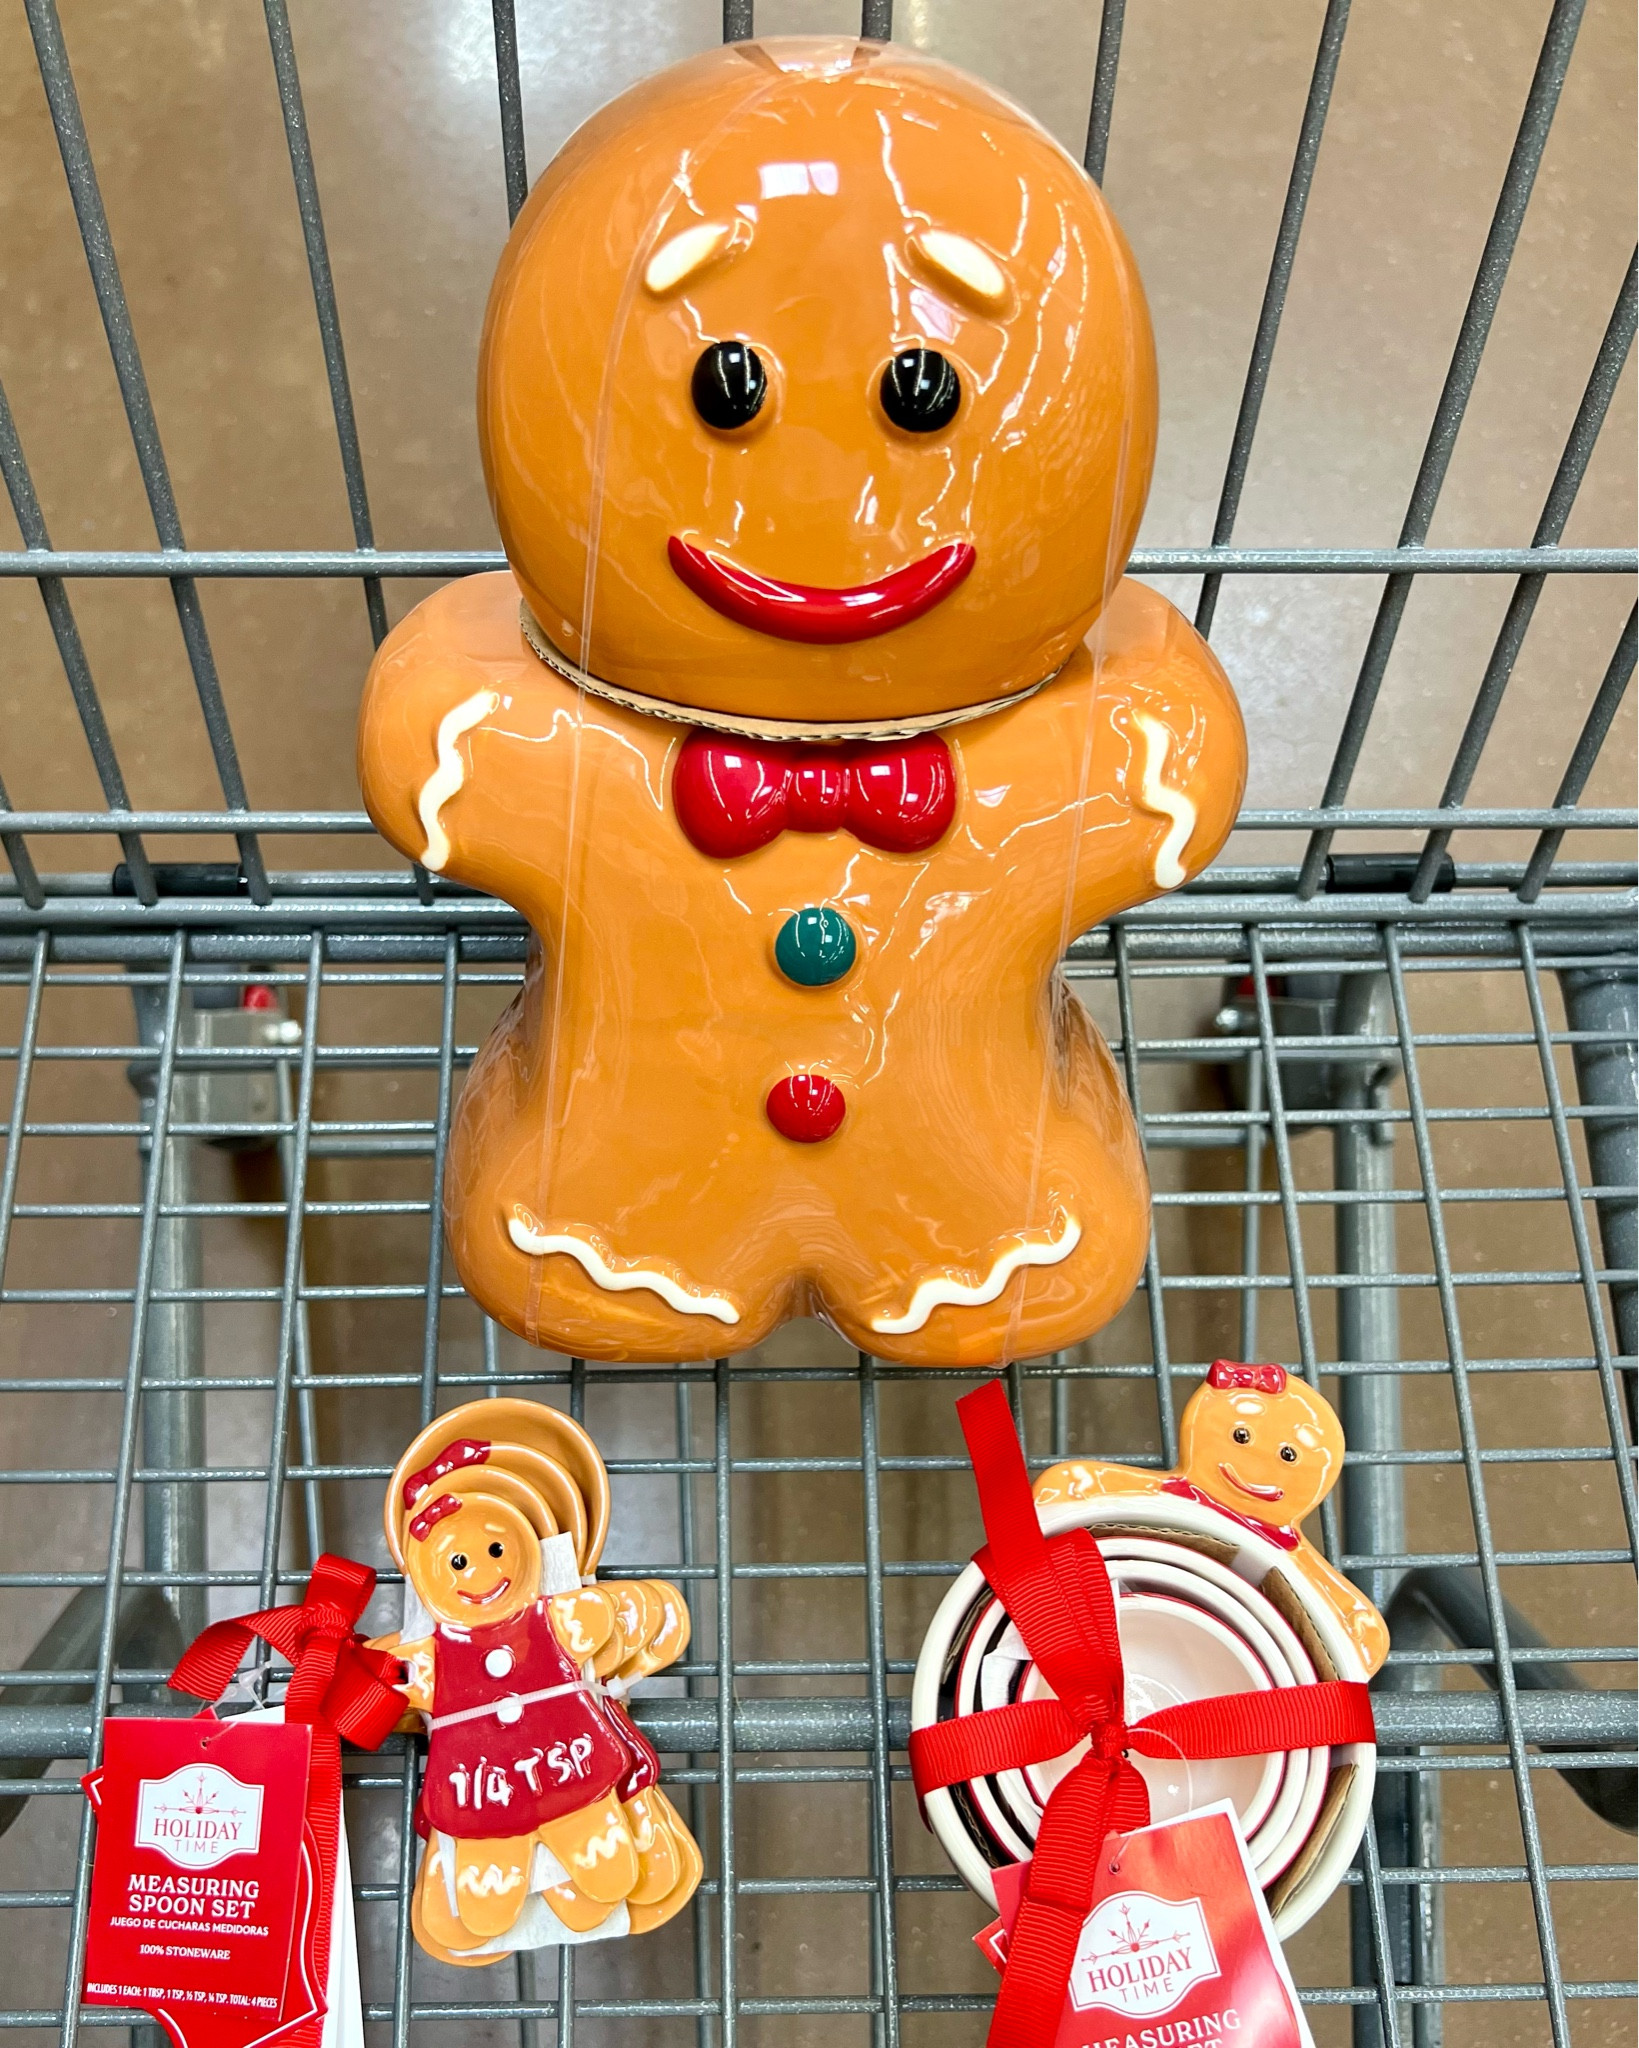 Squishmallow Clip (Gingerbread Man 3.5 in ea) Clip On Christmas